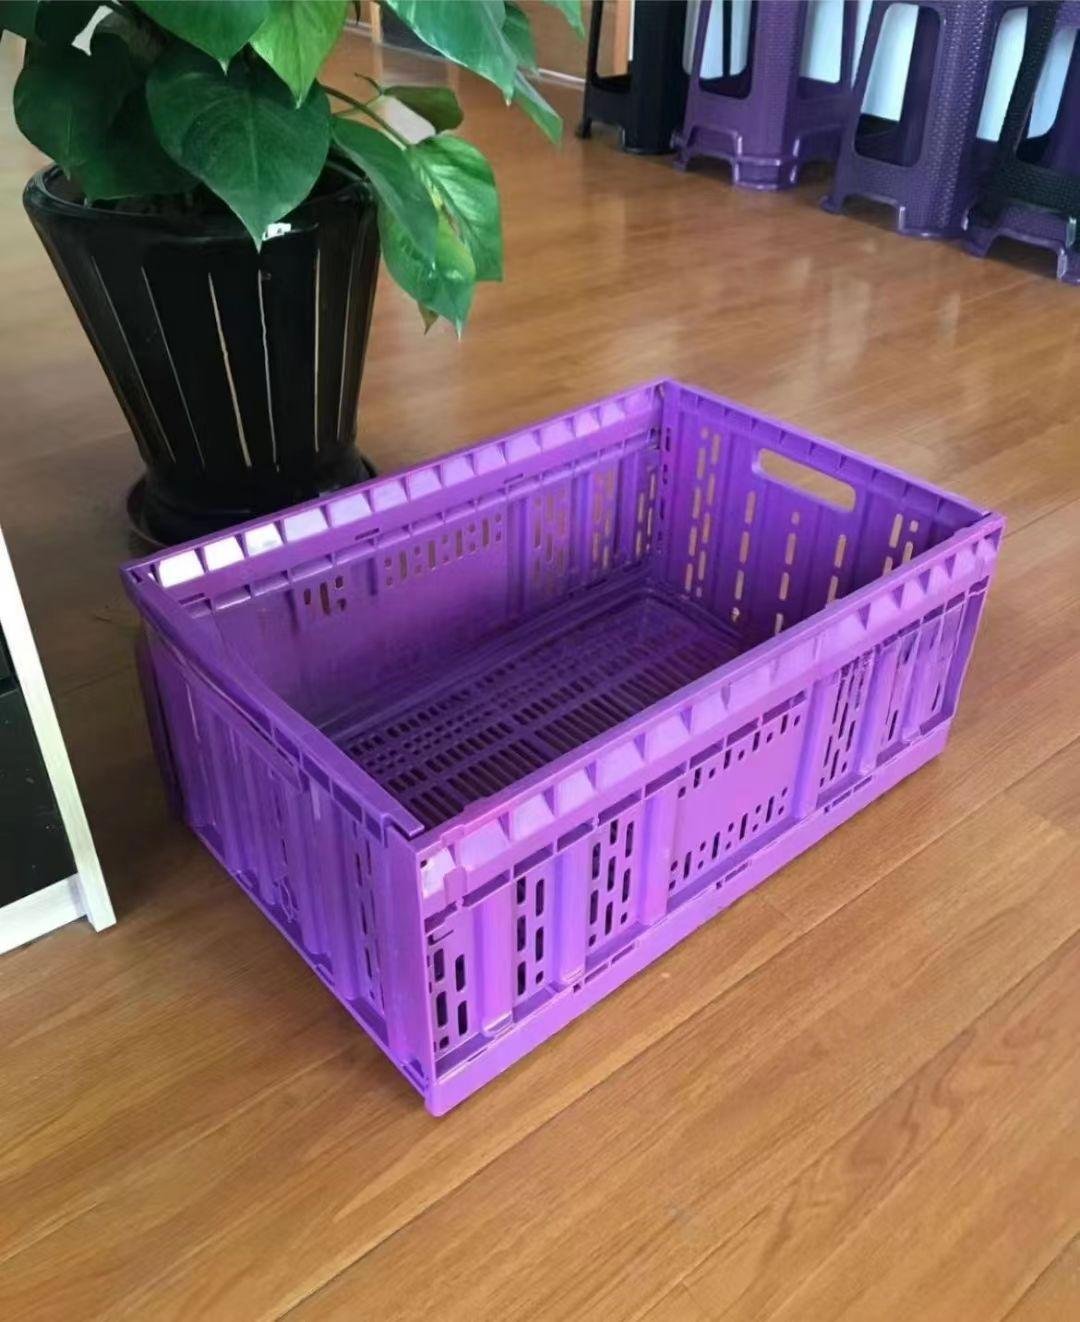 Taizhou professional factory customized high-quality plastic crate mold